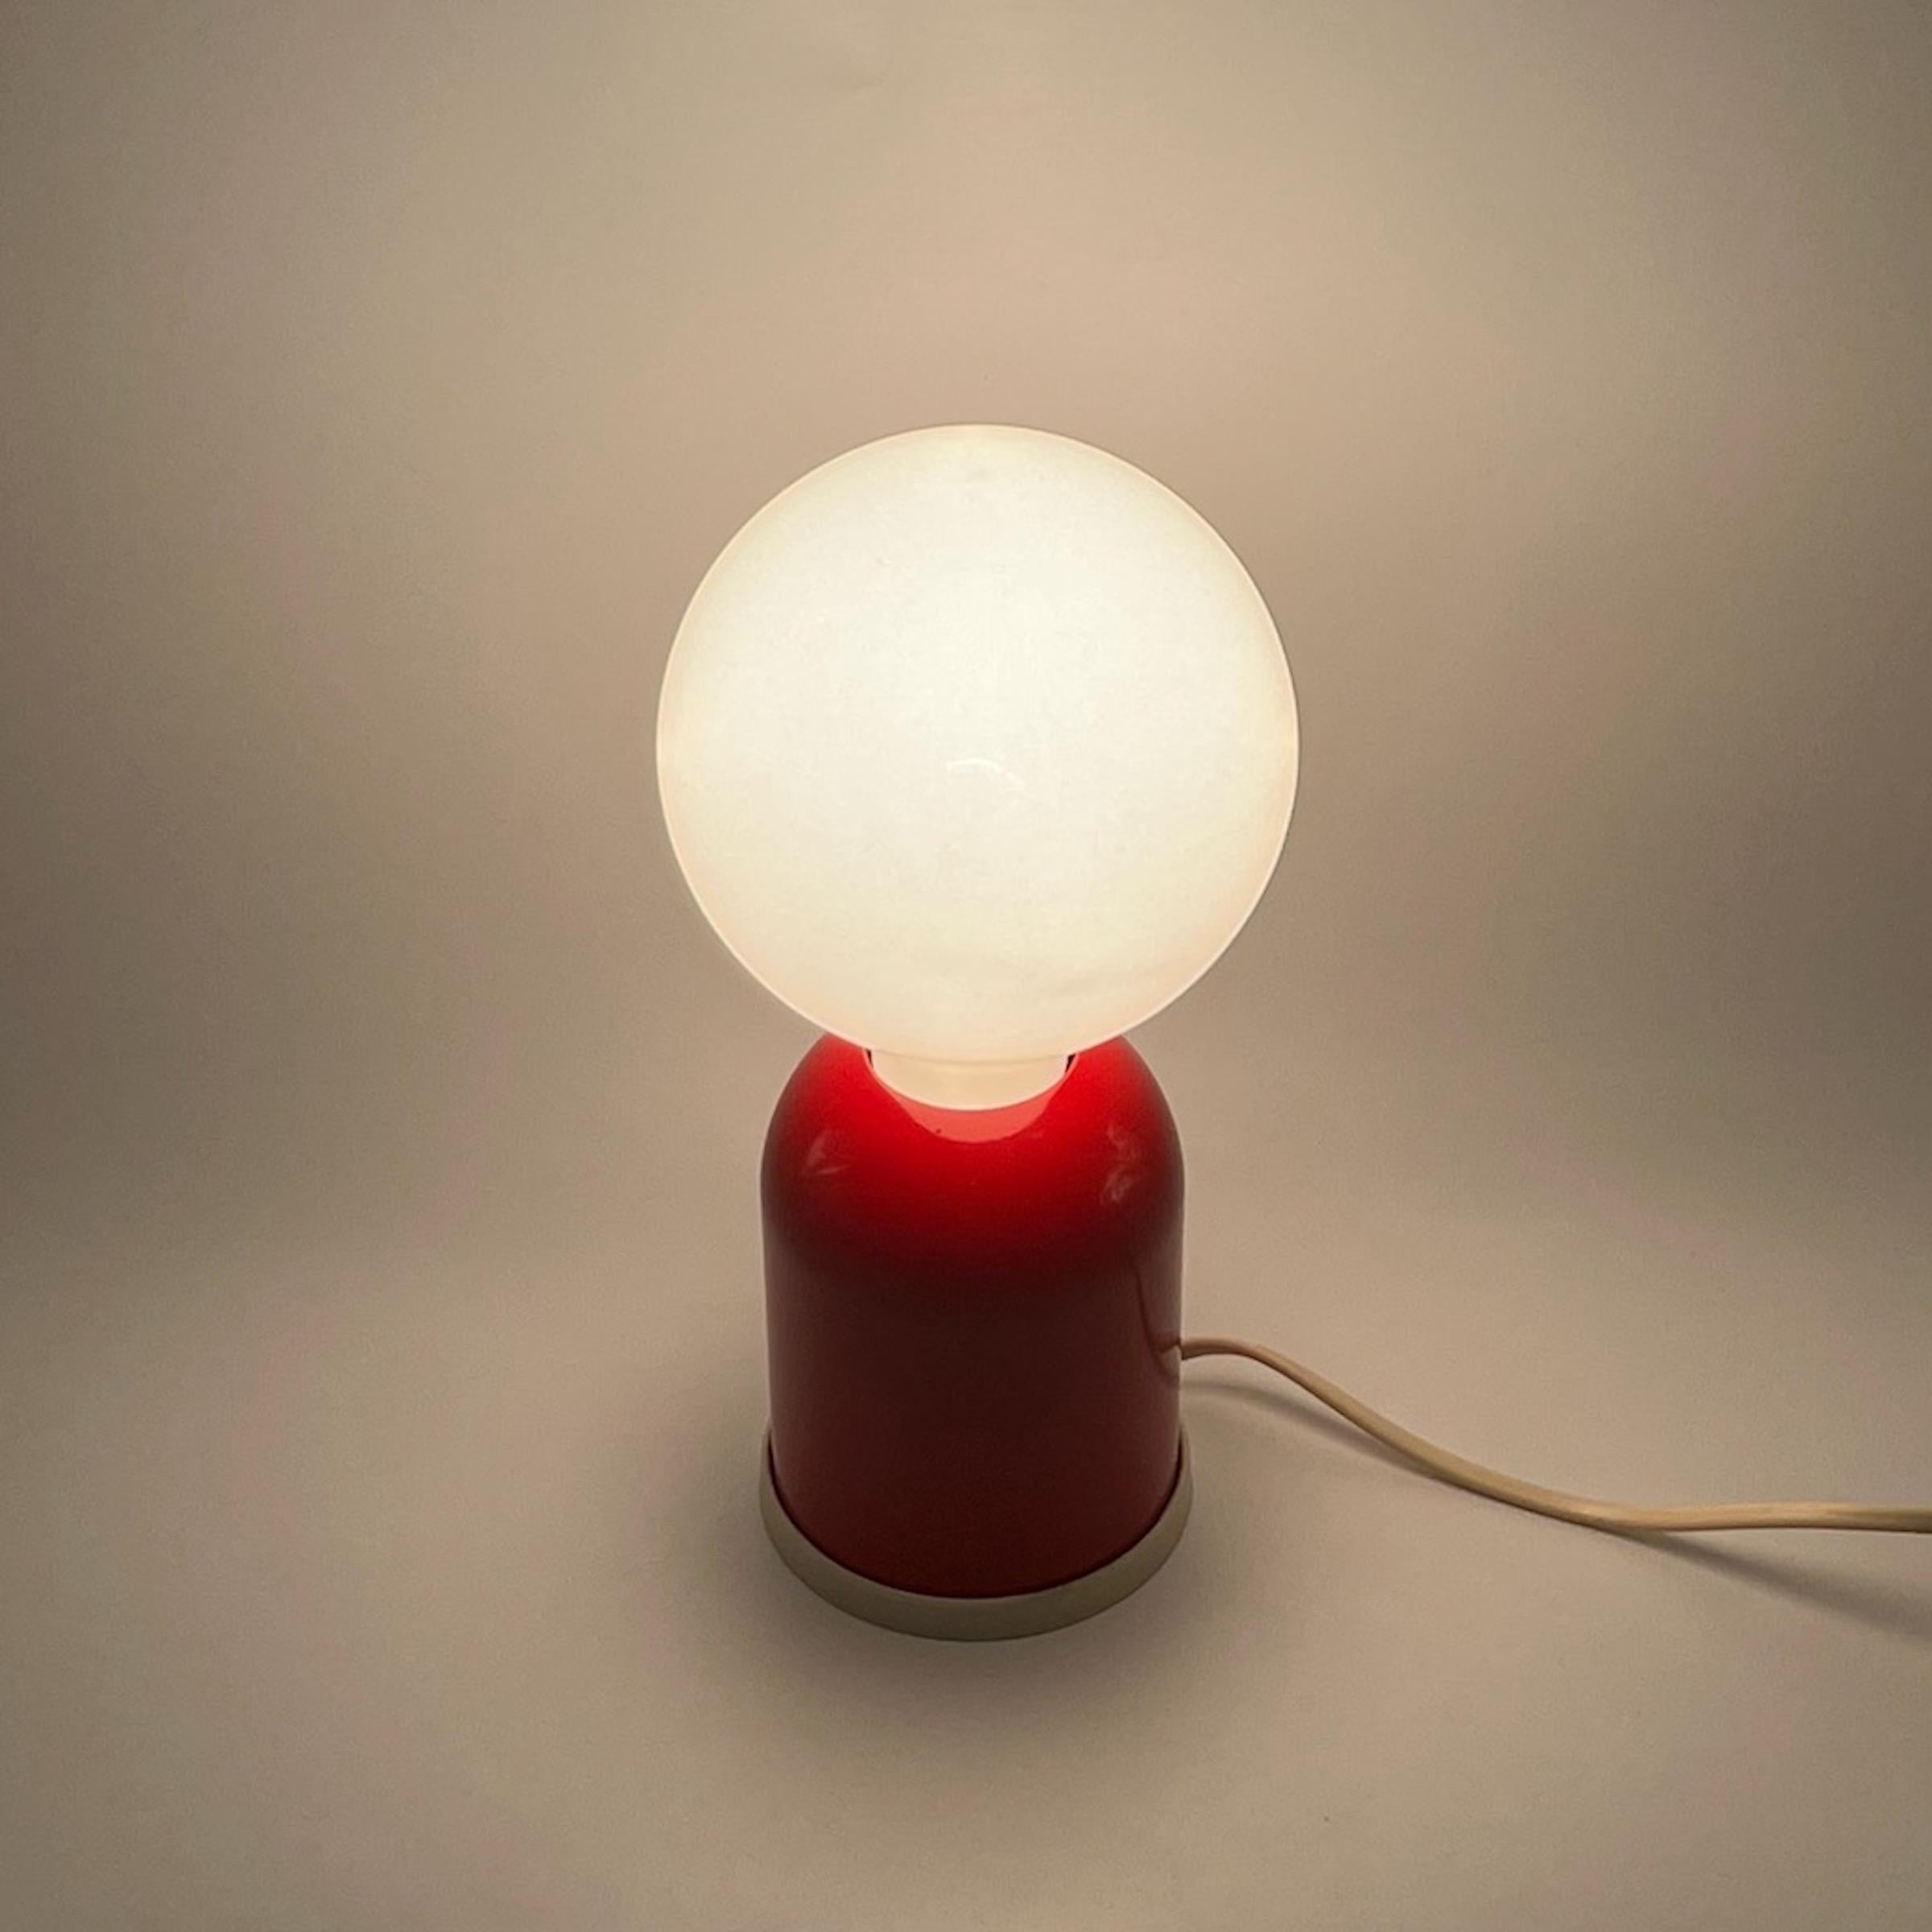 Minimalistic Table Lamp in Lacquered Red Metal by Targetti Sankey, 1980s For Sale 5